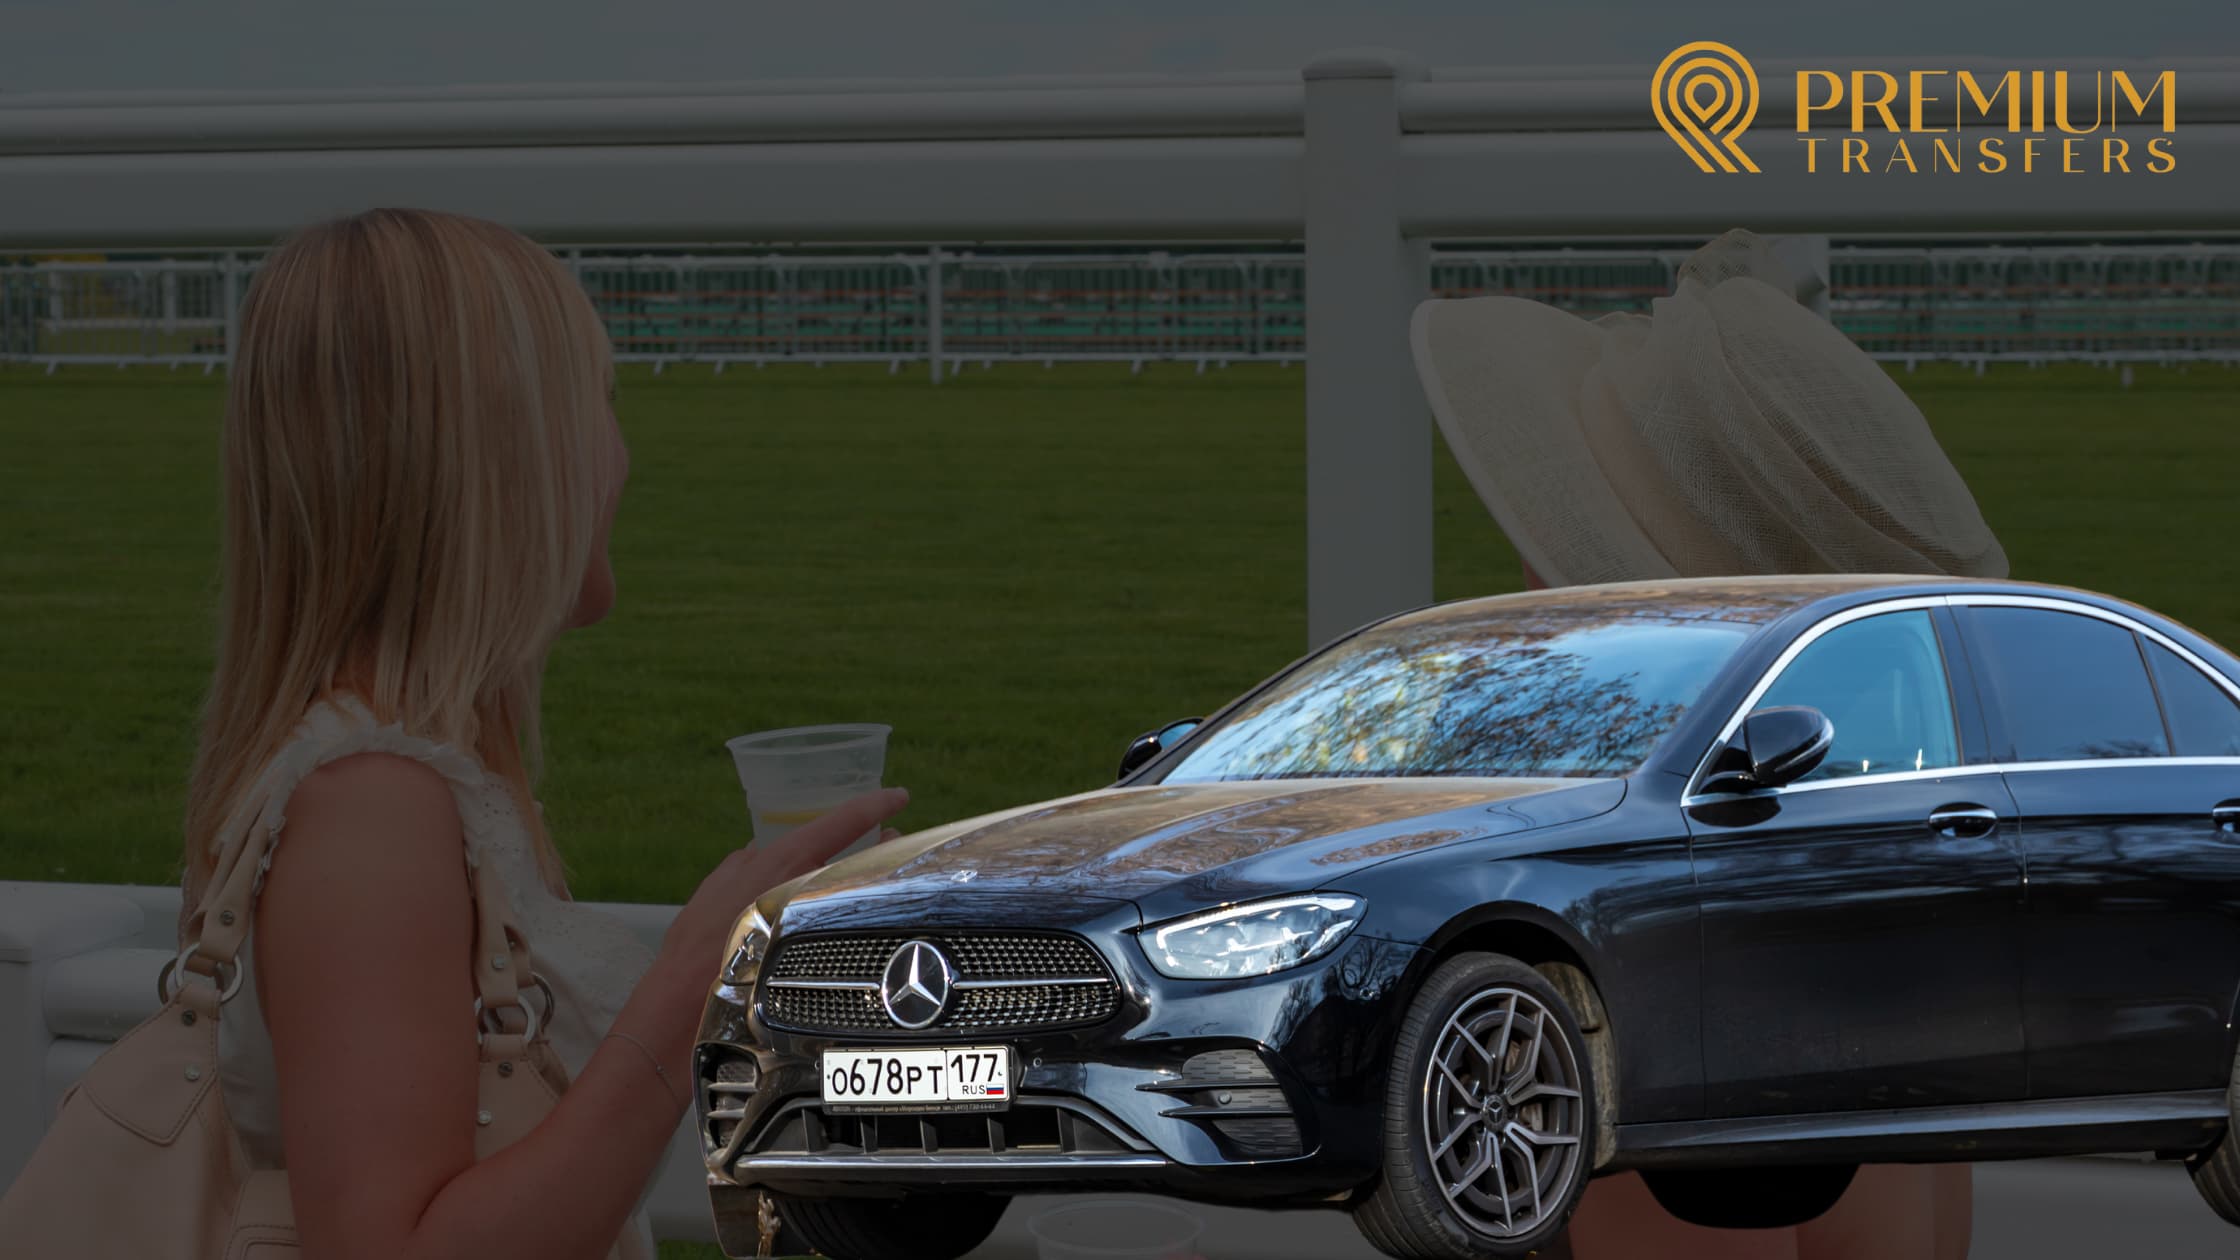 Experience the Pinnacle of Luxury with Premium Transfers' Royal Ascot Chauffeur Service